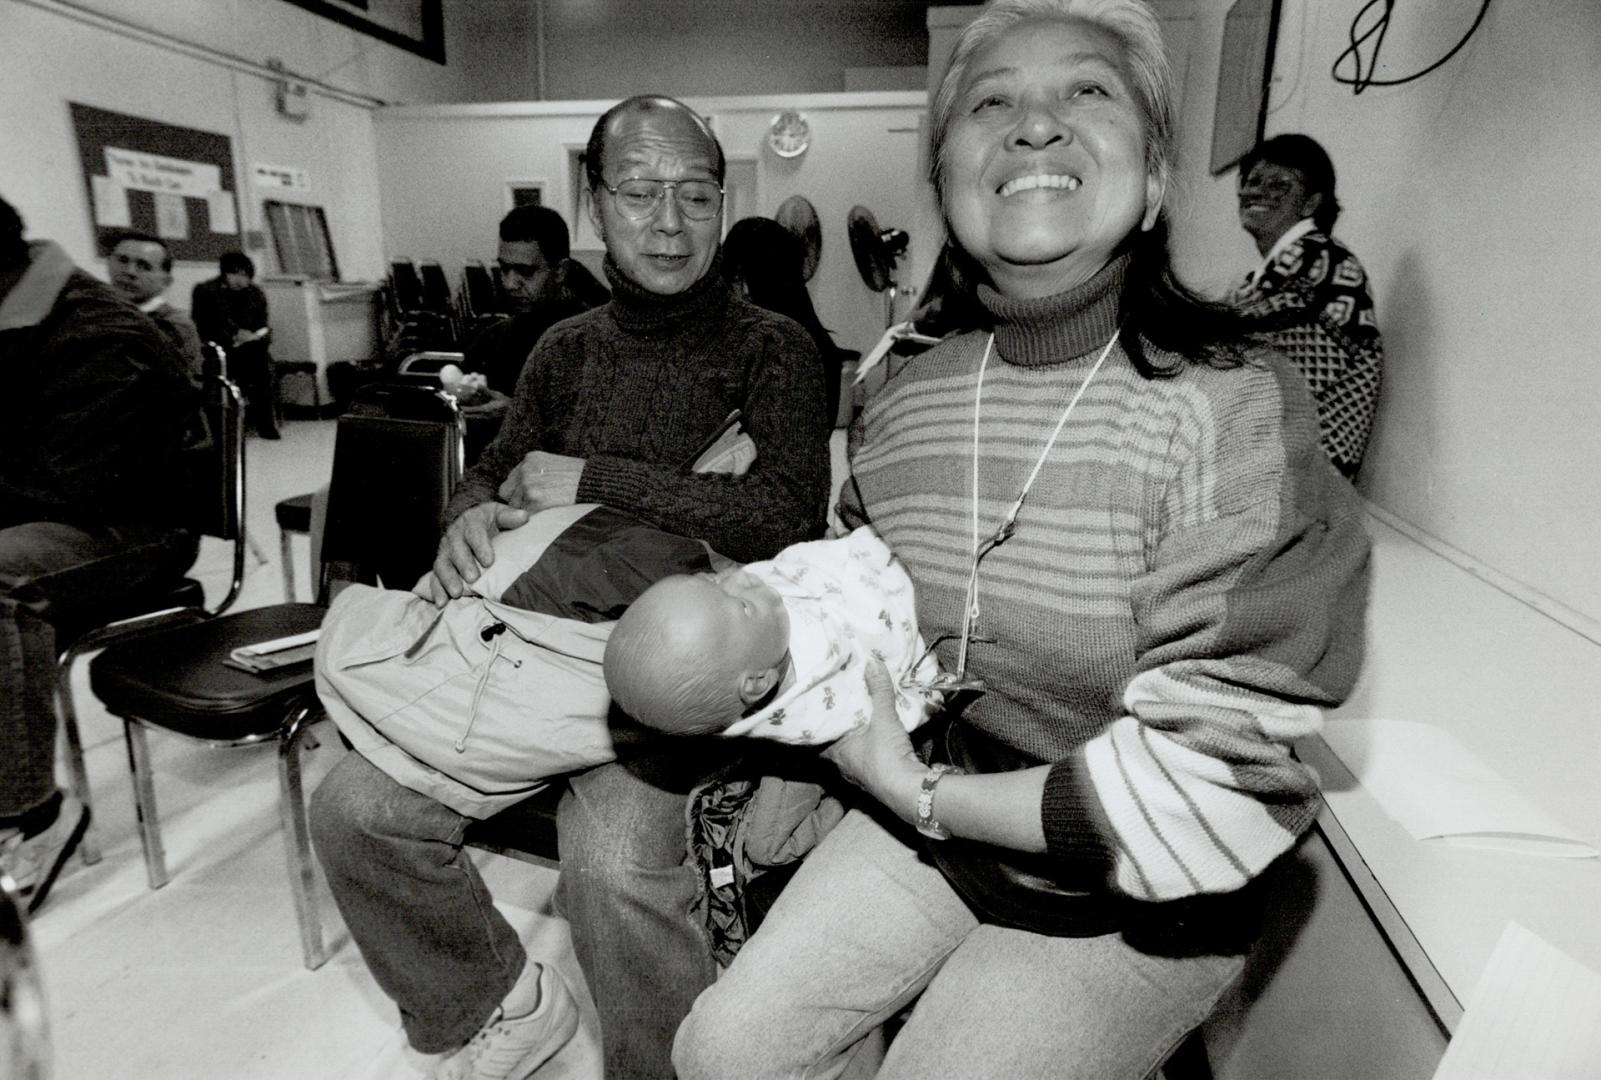 Le Chuoiling and Le Chunpong attend a demonstration on care of newborns